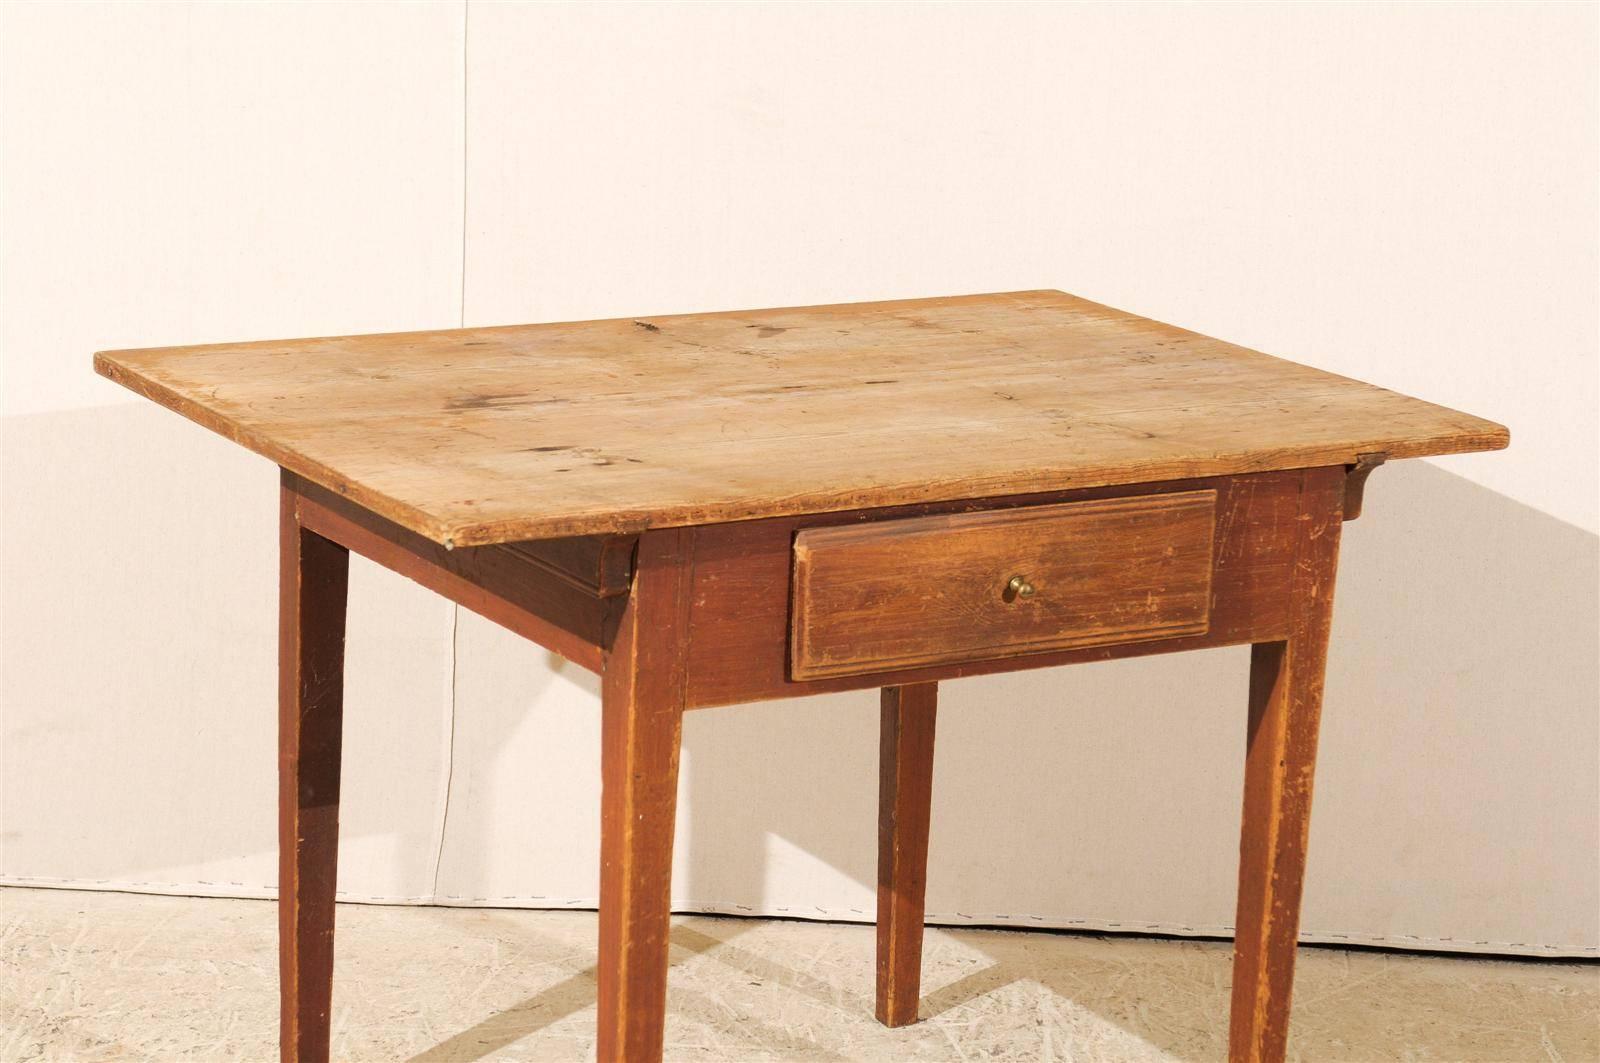 simple wooden table